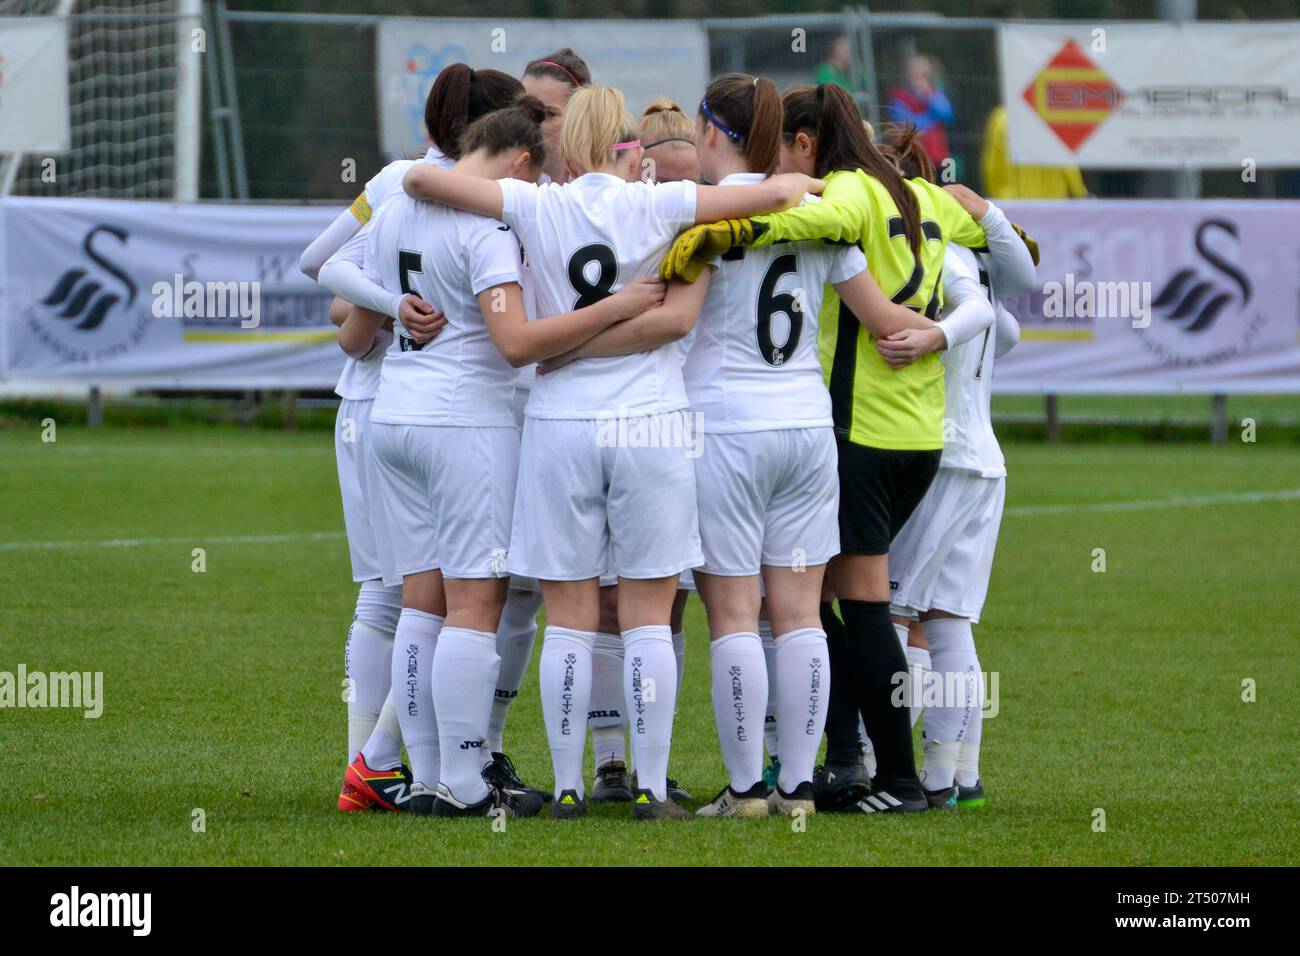 Neath, Wales. 22 January 2017. The Swansea City Ladies team in a huddle before the Welsh Premier Women's League match between Swansea City Ladies and Cardiff Met Ladies at Llandarcy Academy of Sport in Neath, Wales, UK on 22 January 2017. Credit: Duncan Thomas/Majestic Media. Stock Photo